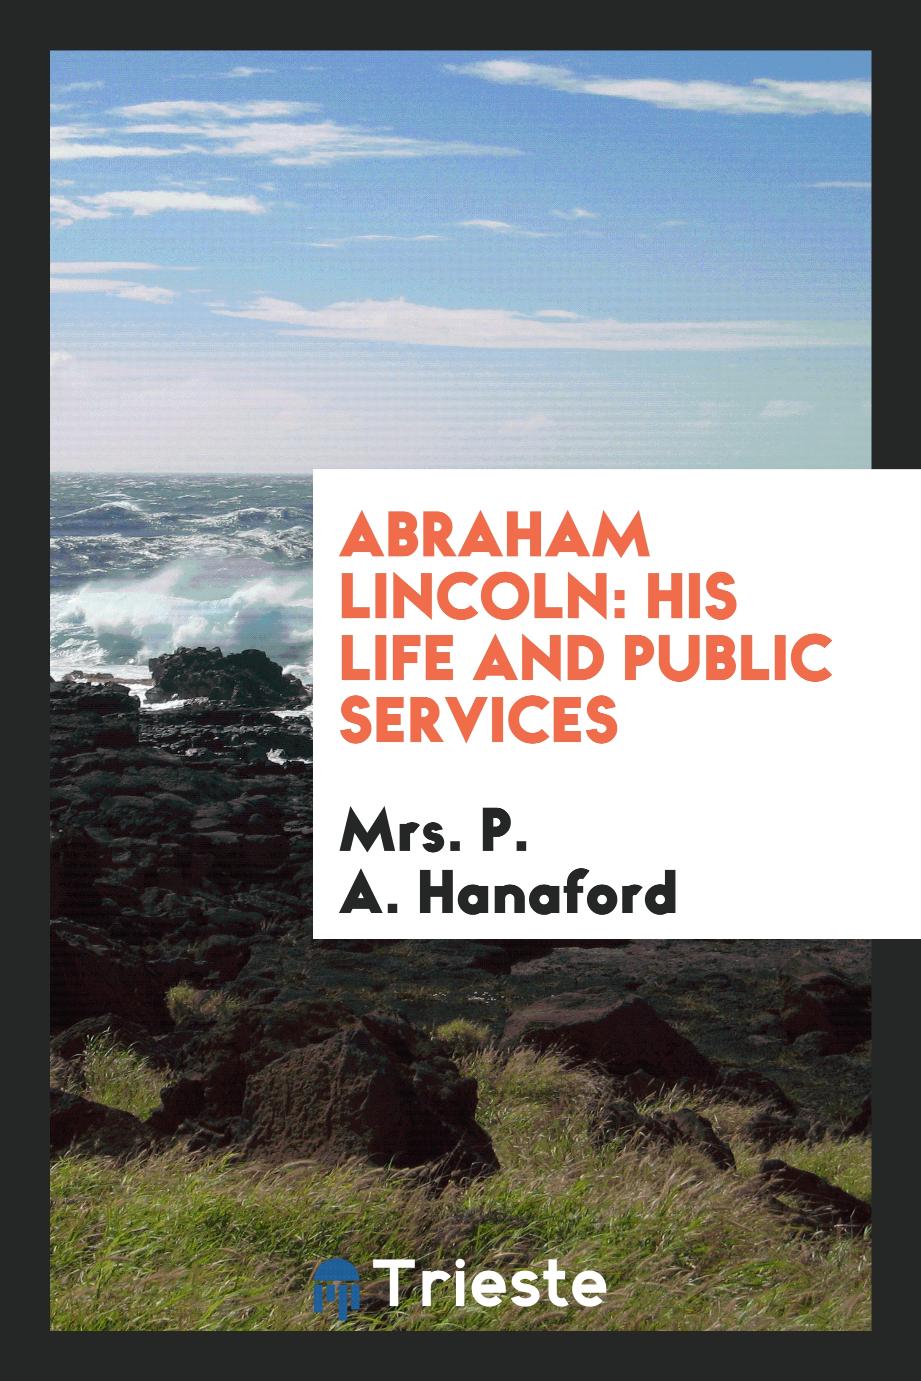 Abraham Lincoln: his life and public services